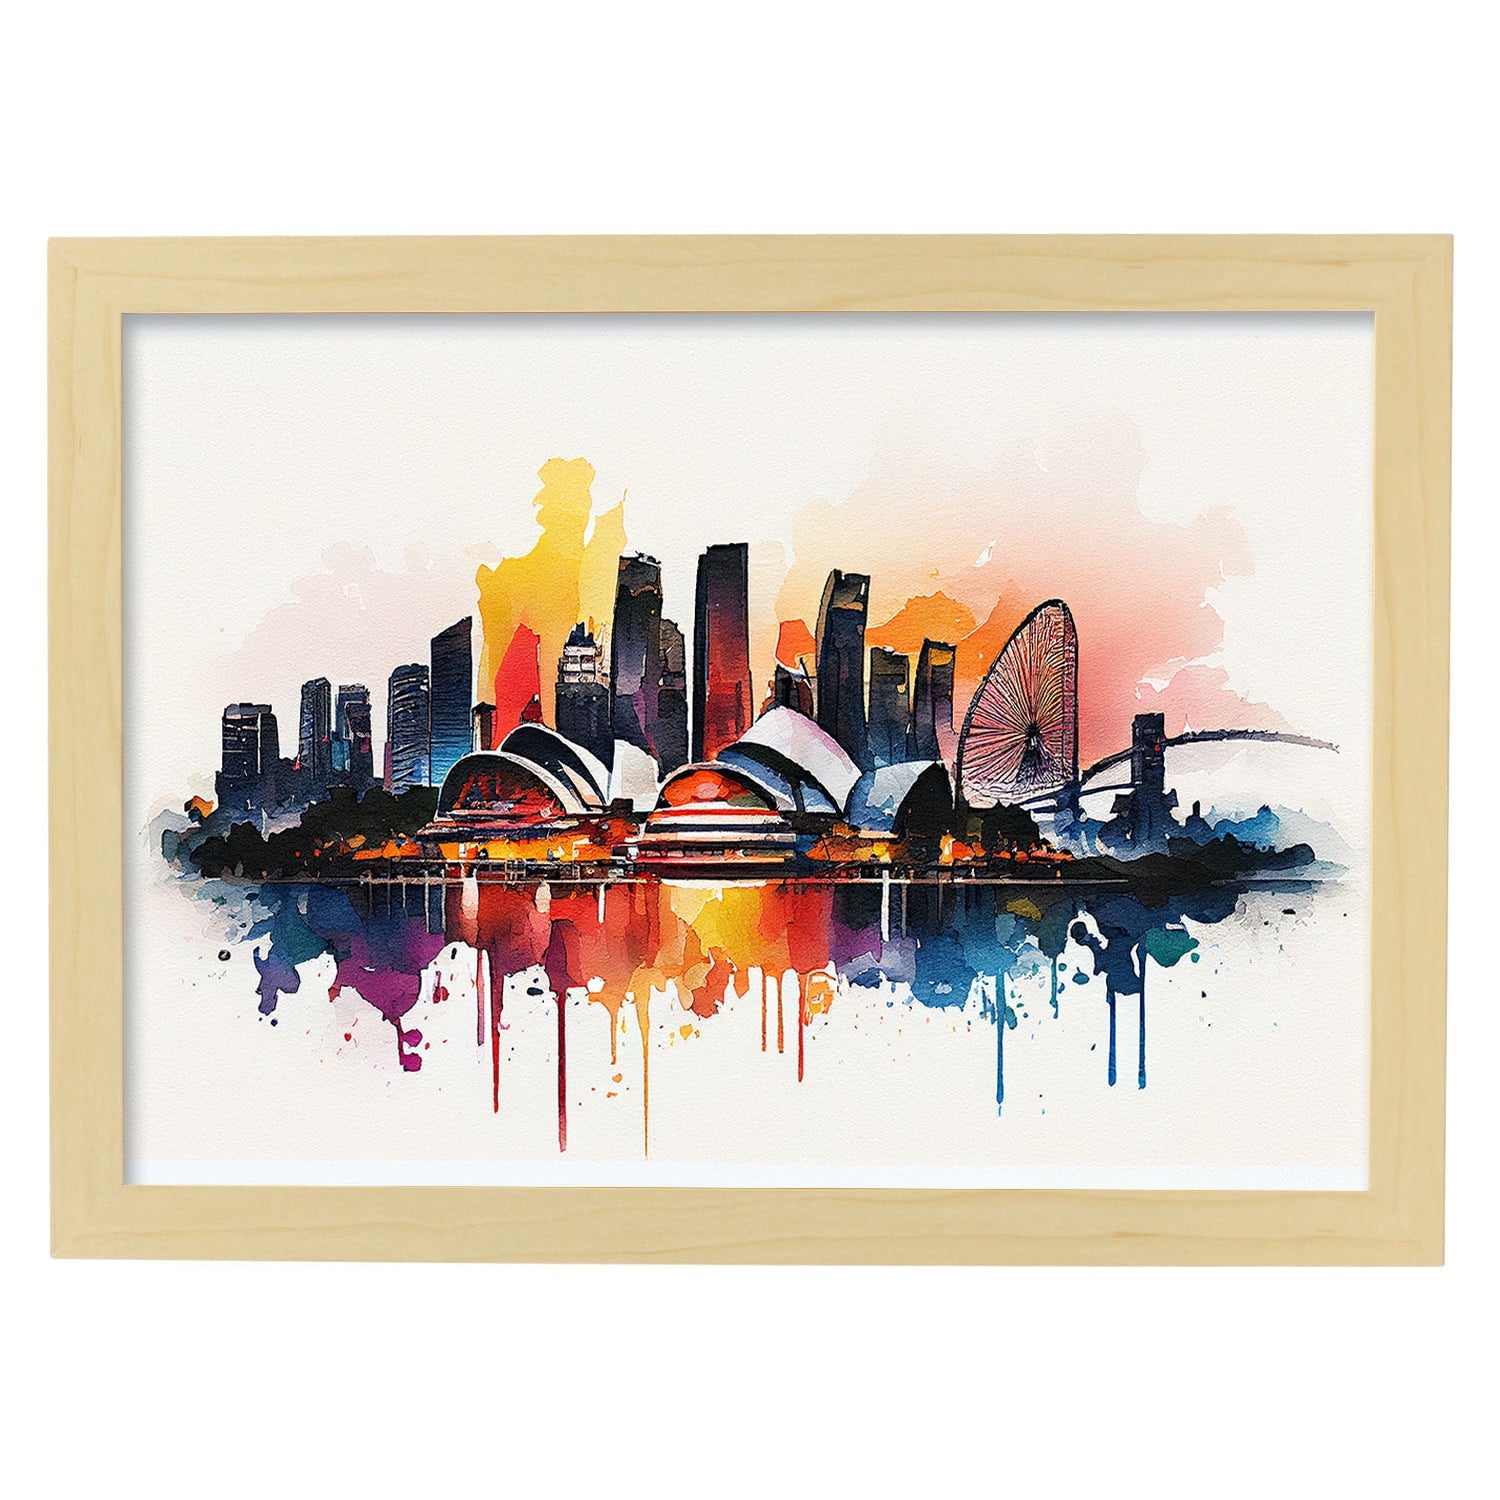 Nacnic watercolor of a skyline of the city of Singapore_2. Aesthetic Wall Art Prints for Bedroom or Living Room Design.-Artwork-Nacnic-A4-Marco Madera Clara-Nacnic Estudio SL